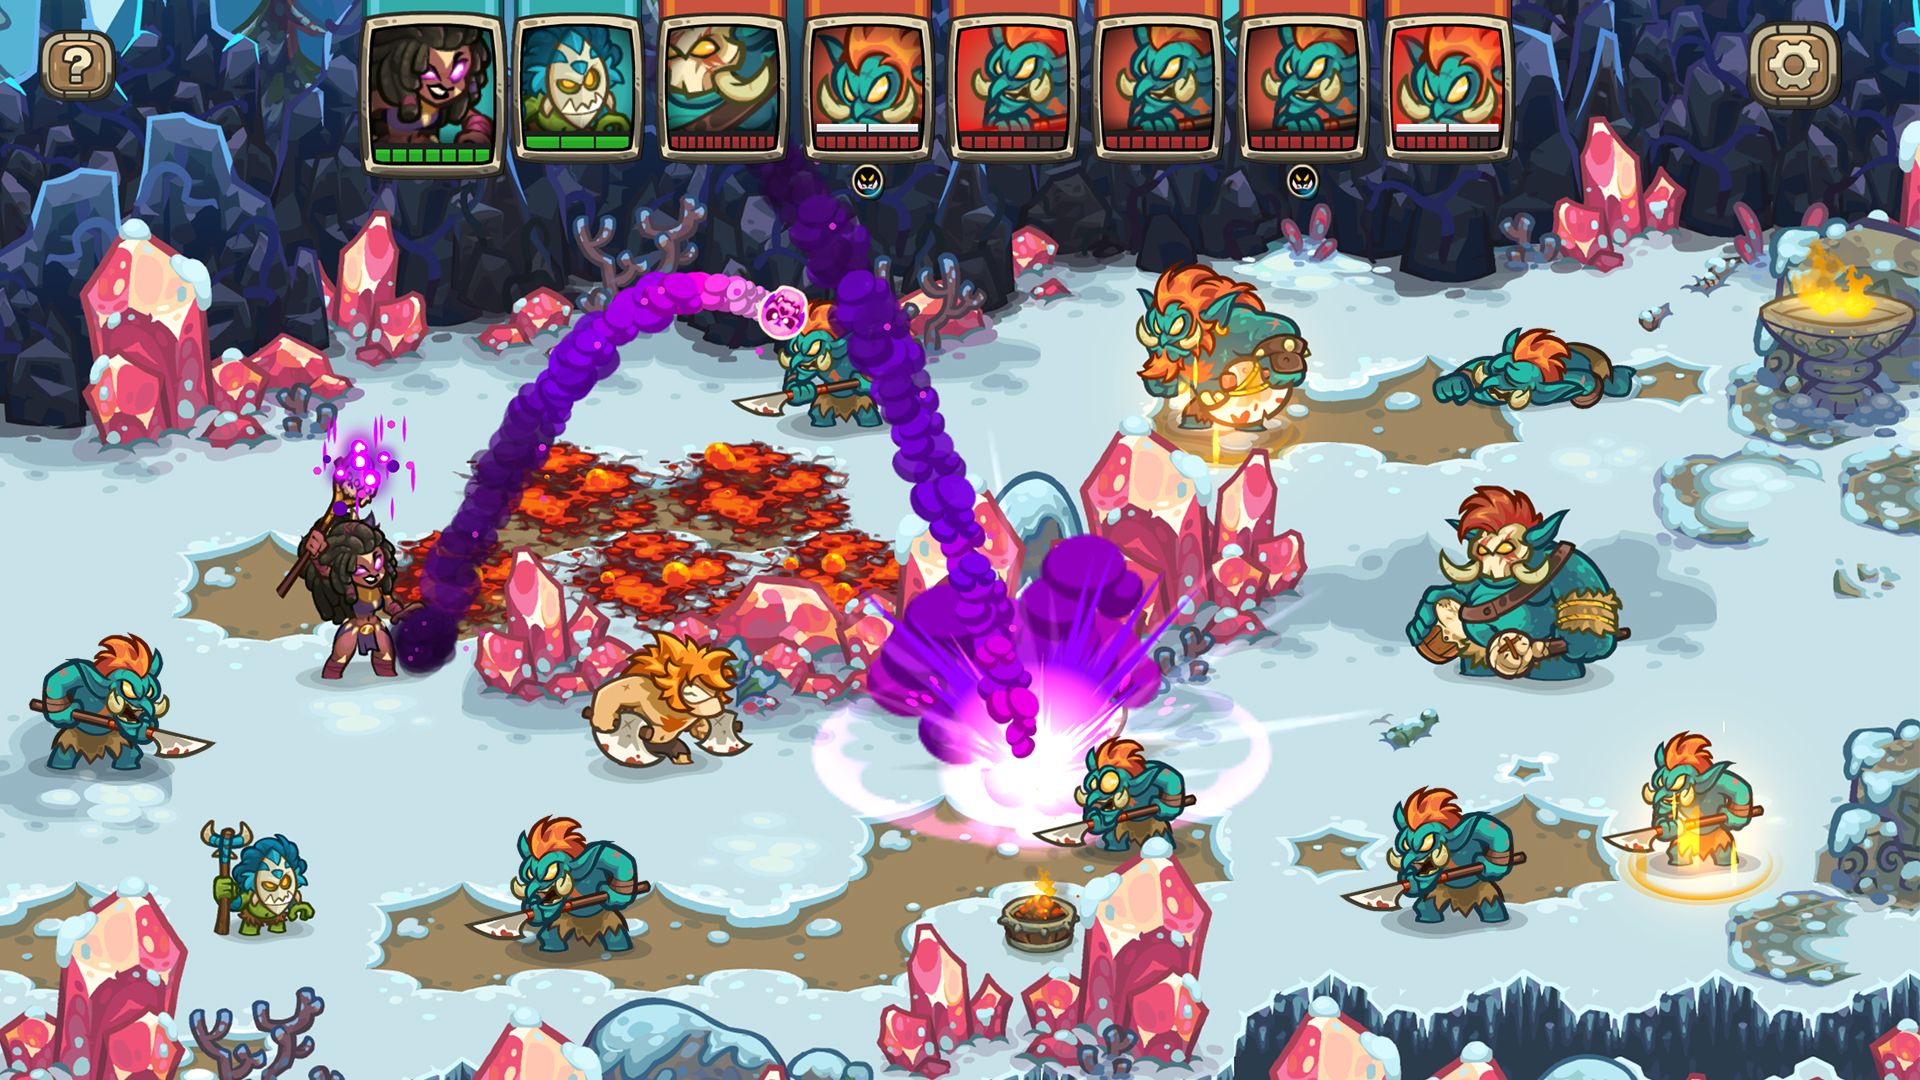 Screenshot from the game; the player character releases a purple magic barrage against an enemy team of blue trolls.